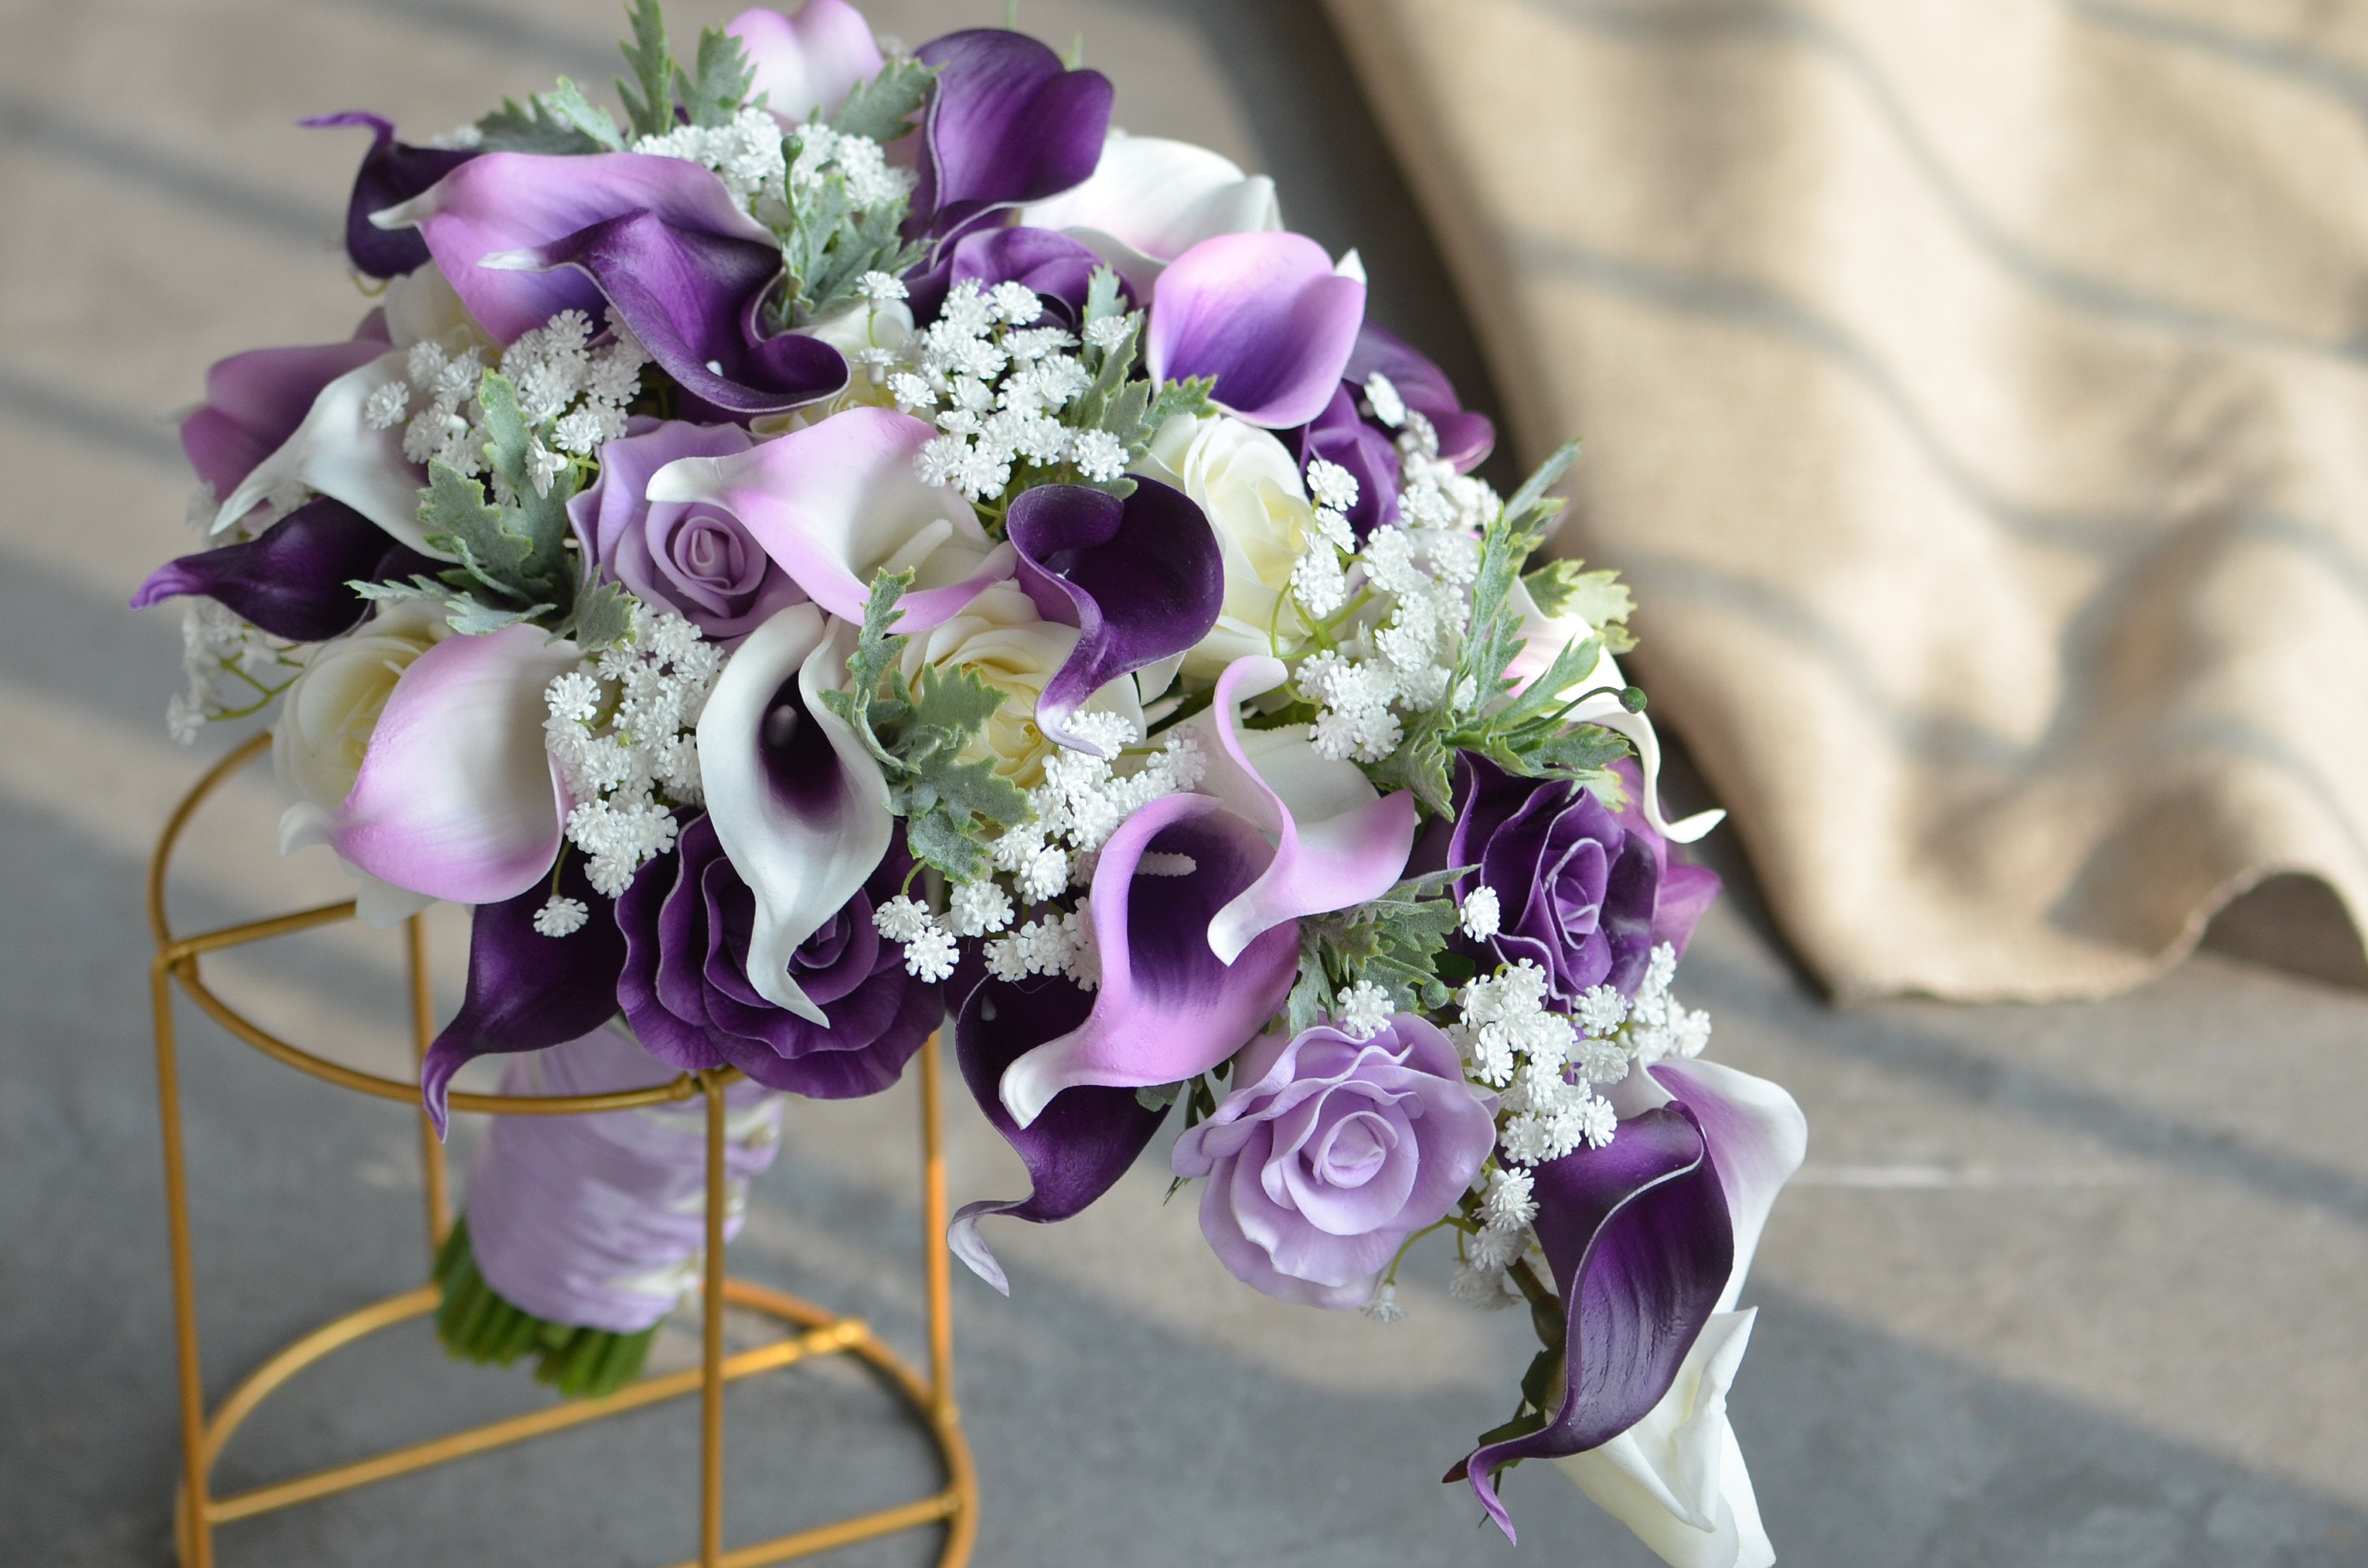 Ivory White Sweden Roses, Bouquet, Bridal Real Lilies, Bridal Bouquets, Rustic - Touch Baby\'s Fake Calla Purple Bridesmaids Silk Breath Etsy Bouquets,